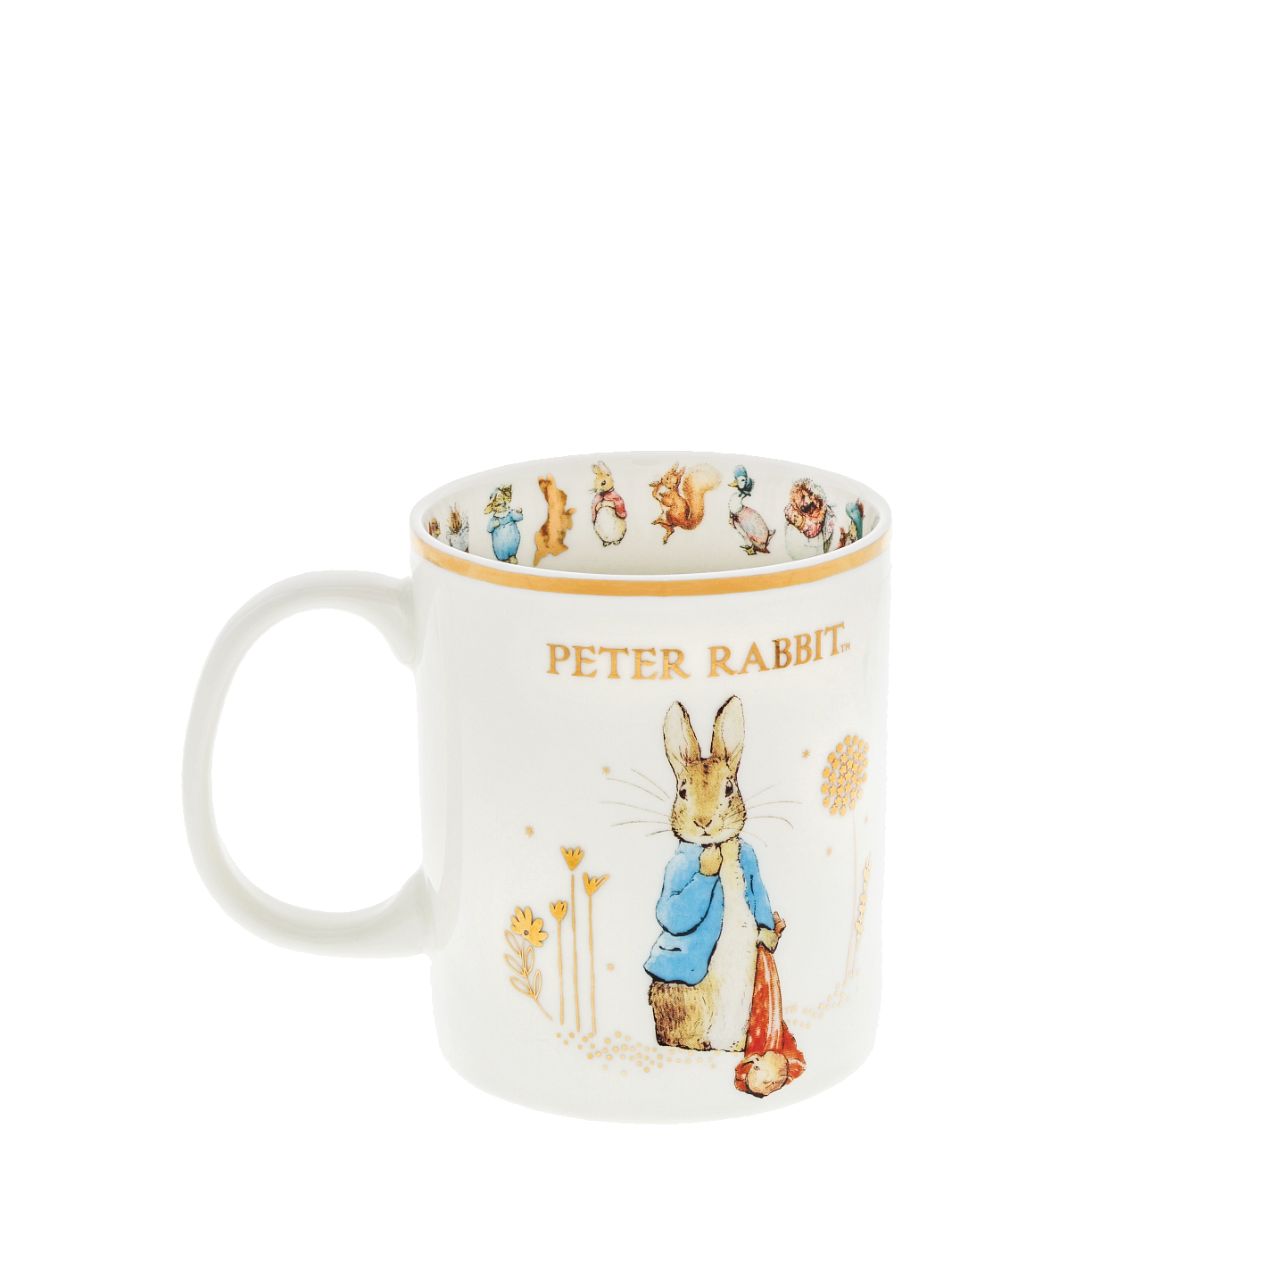 Beatrix Potter Peter Rabbit with Pocket Handkerchief Special Edition Mug  New and exciting collection, the annual exclusive mug of the year. Peter Rabbit delights us with his presence. This iconic pose has been applied to this bone china mug and is rimmed with gold leaf.